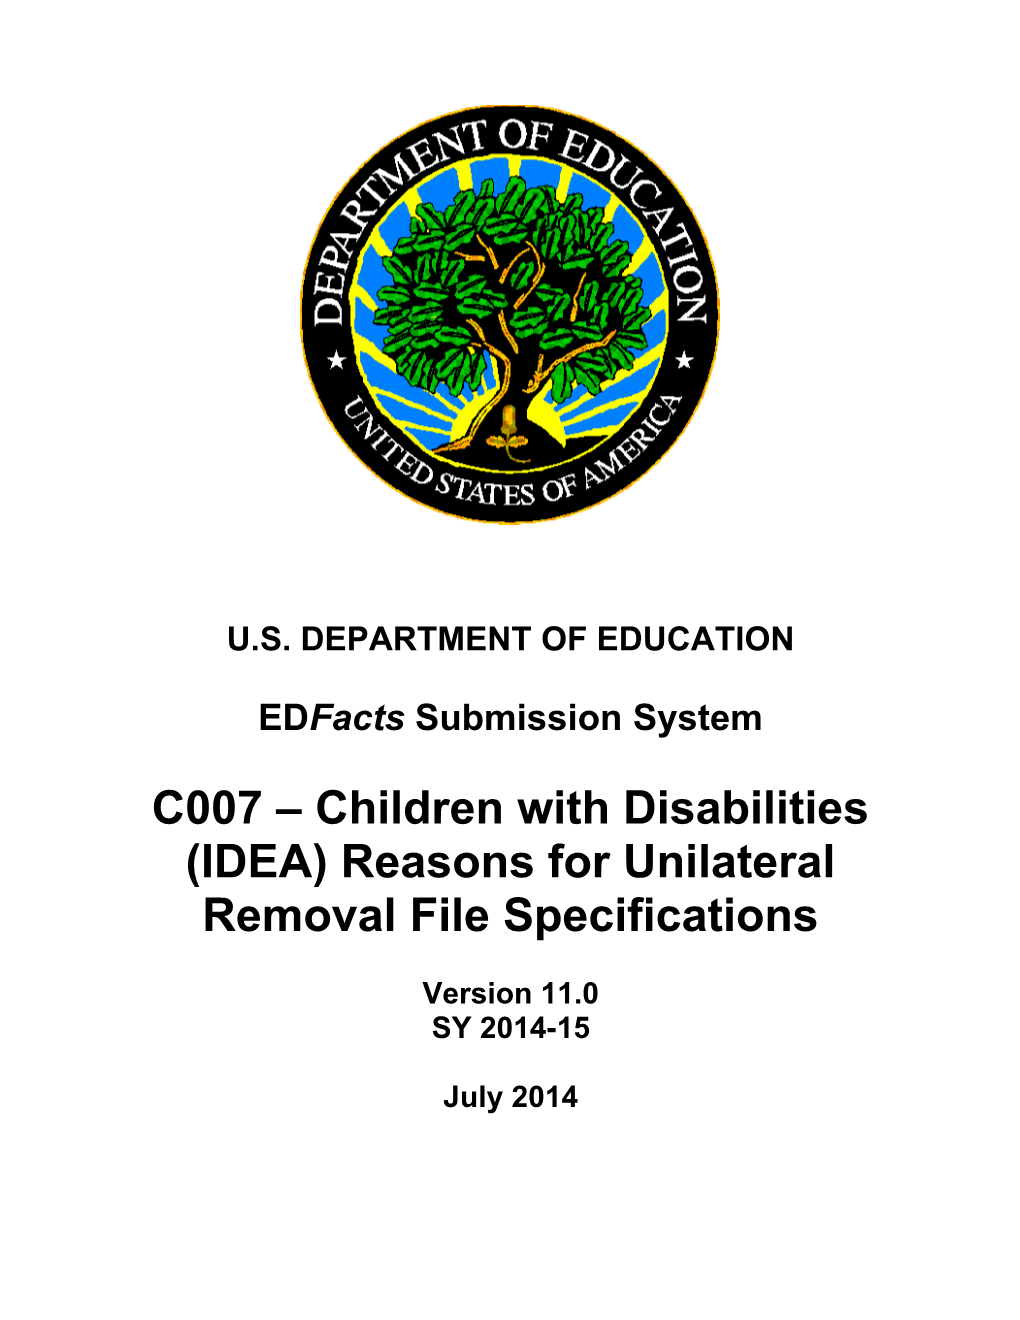 Children with Disabilities (IDEA) Reasons for Unilateral Removal File Specifications